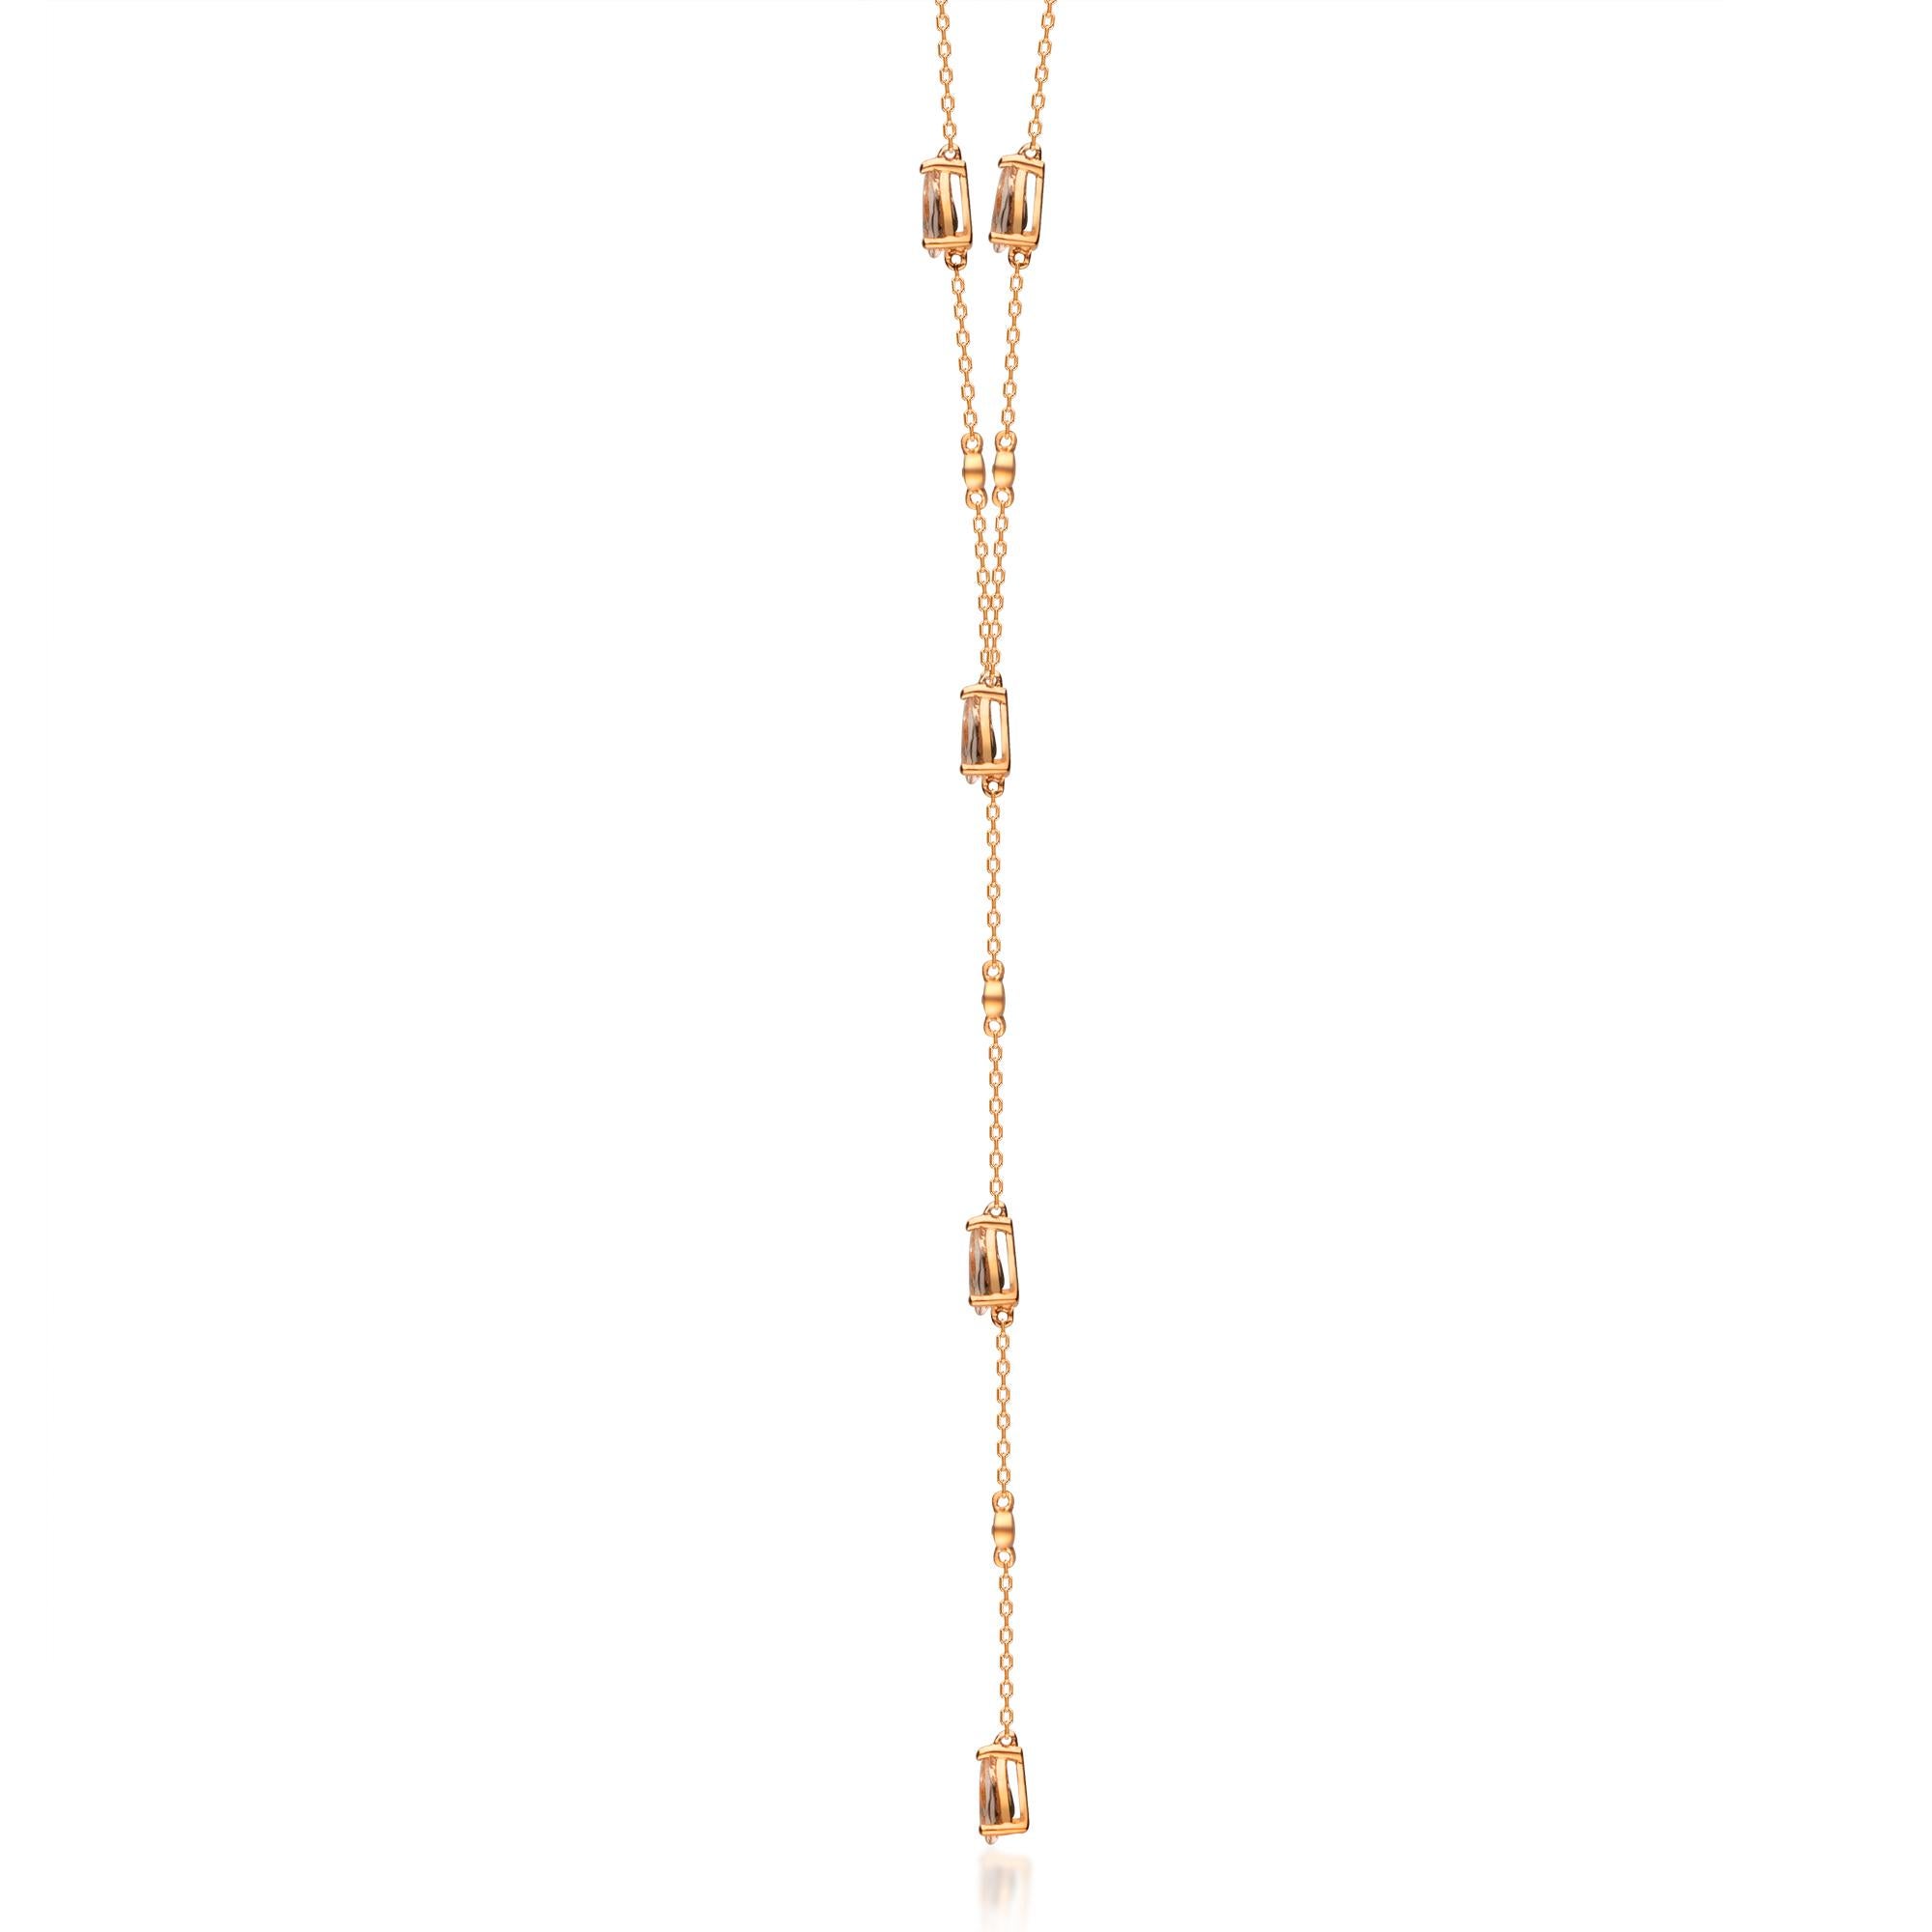 Stunning, timeless and classy eternity Unique Necklace. Decorate yourself in luxury with this Gin & Grace Necklace. The 14K Rose Gold jewelry boasts with Pear-cut Morganite 5 pcs 1.53 carat, Natural Round-cut white Diamond (4 Pcs) 0.03 Carat accent